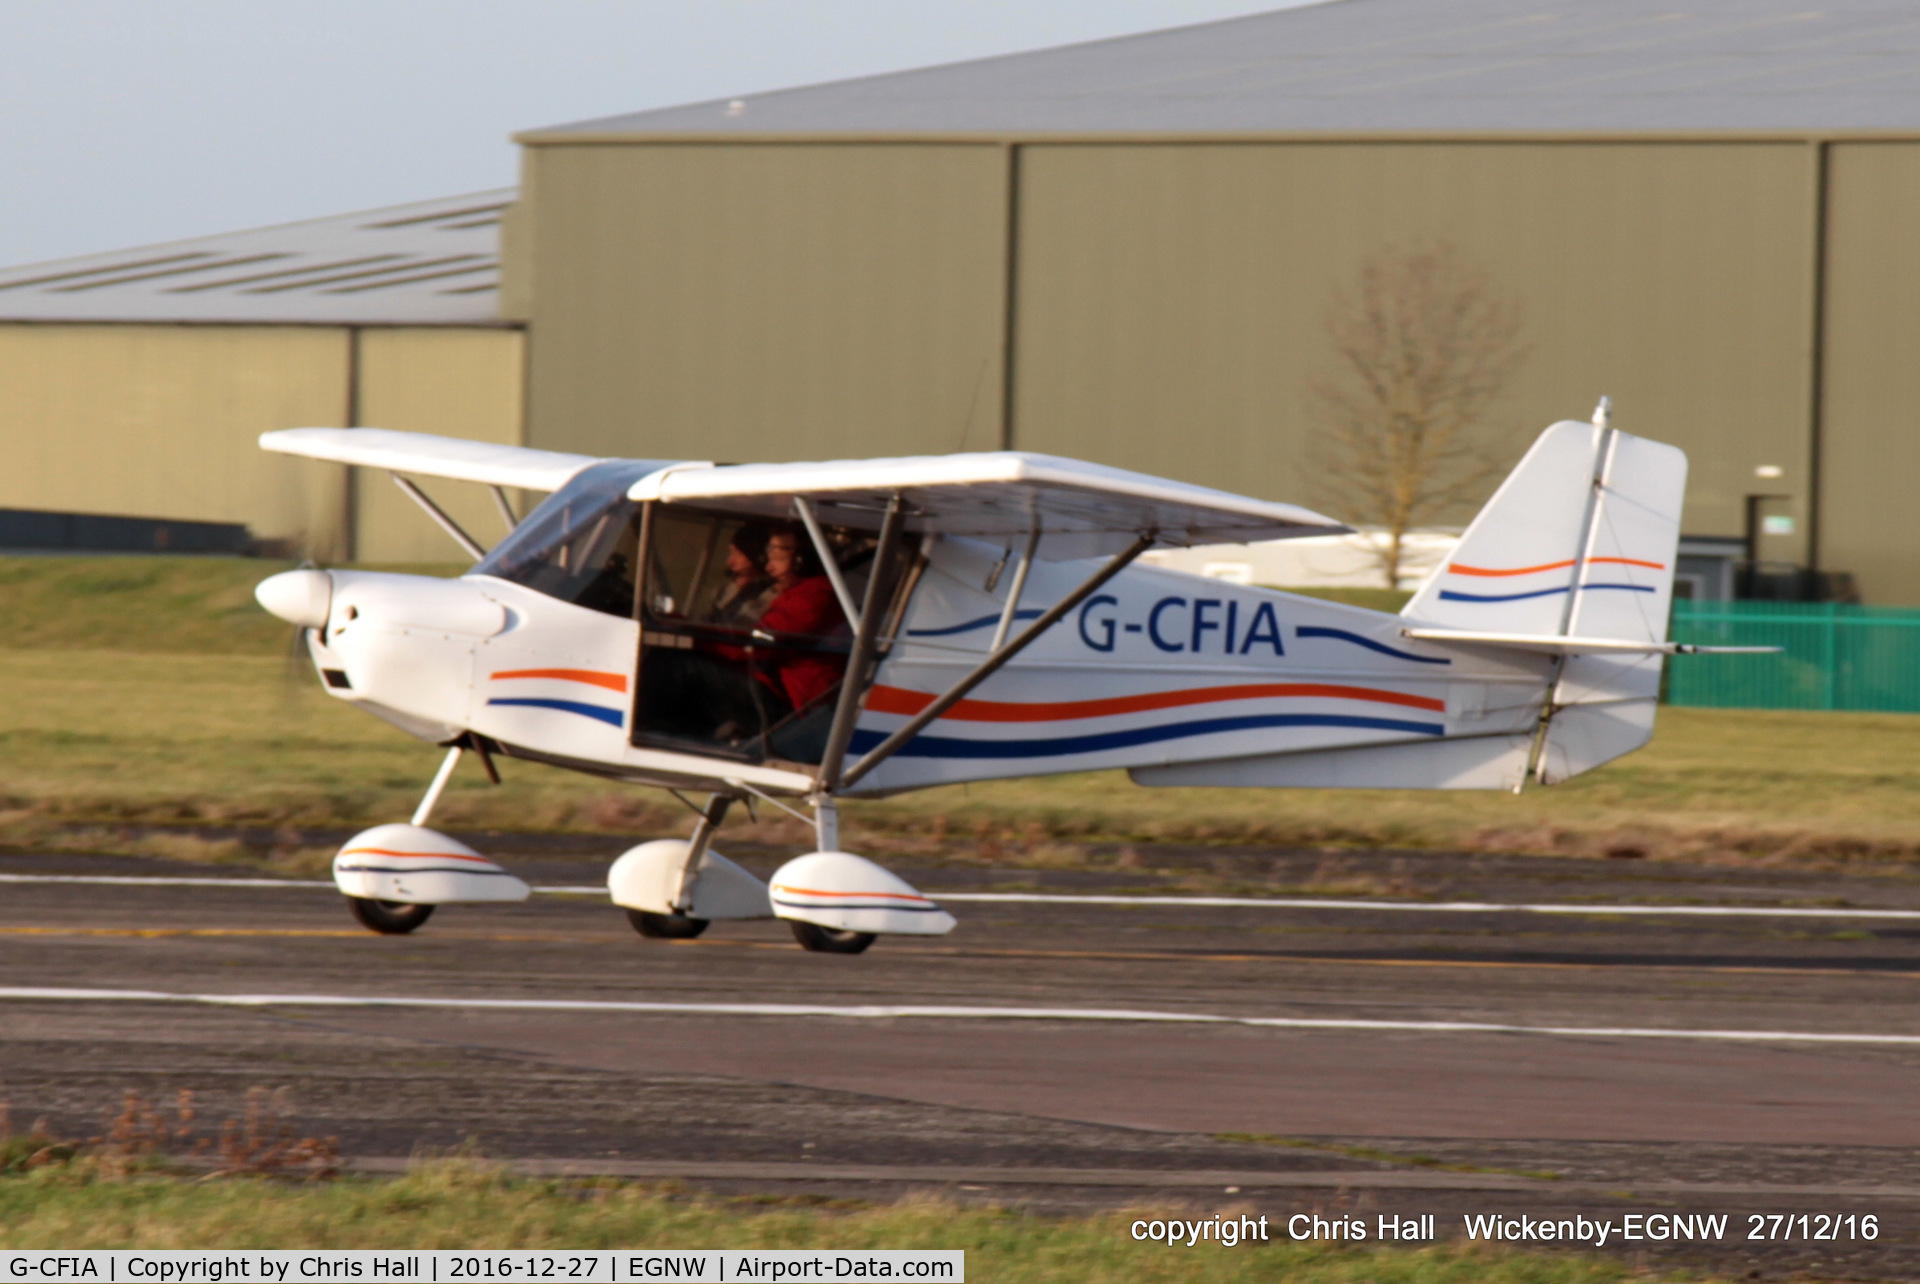 G-CFIA, 2008 Skyranger Swift 912S(1) C/N BMAA/HB/561, at the Wickenby 